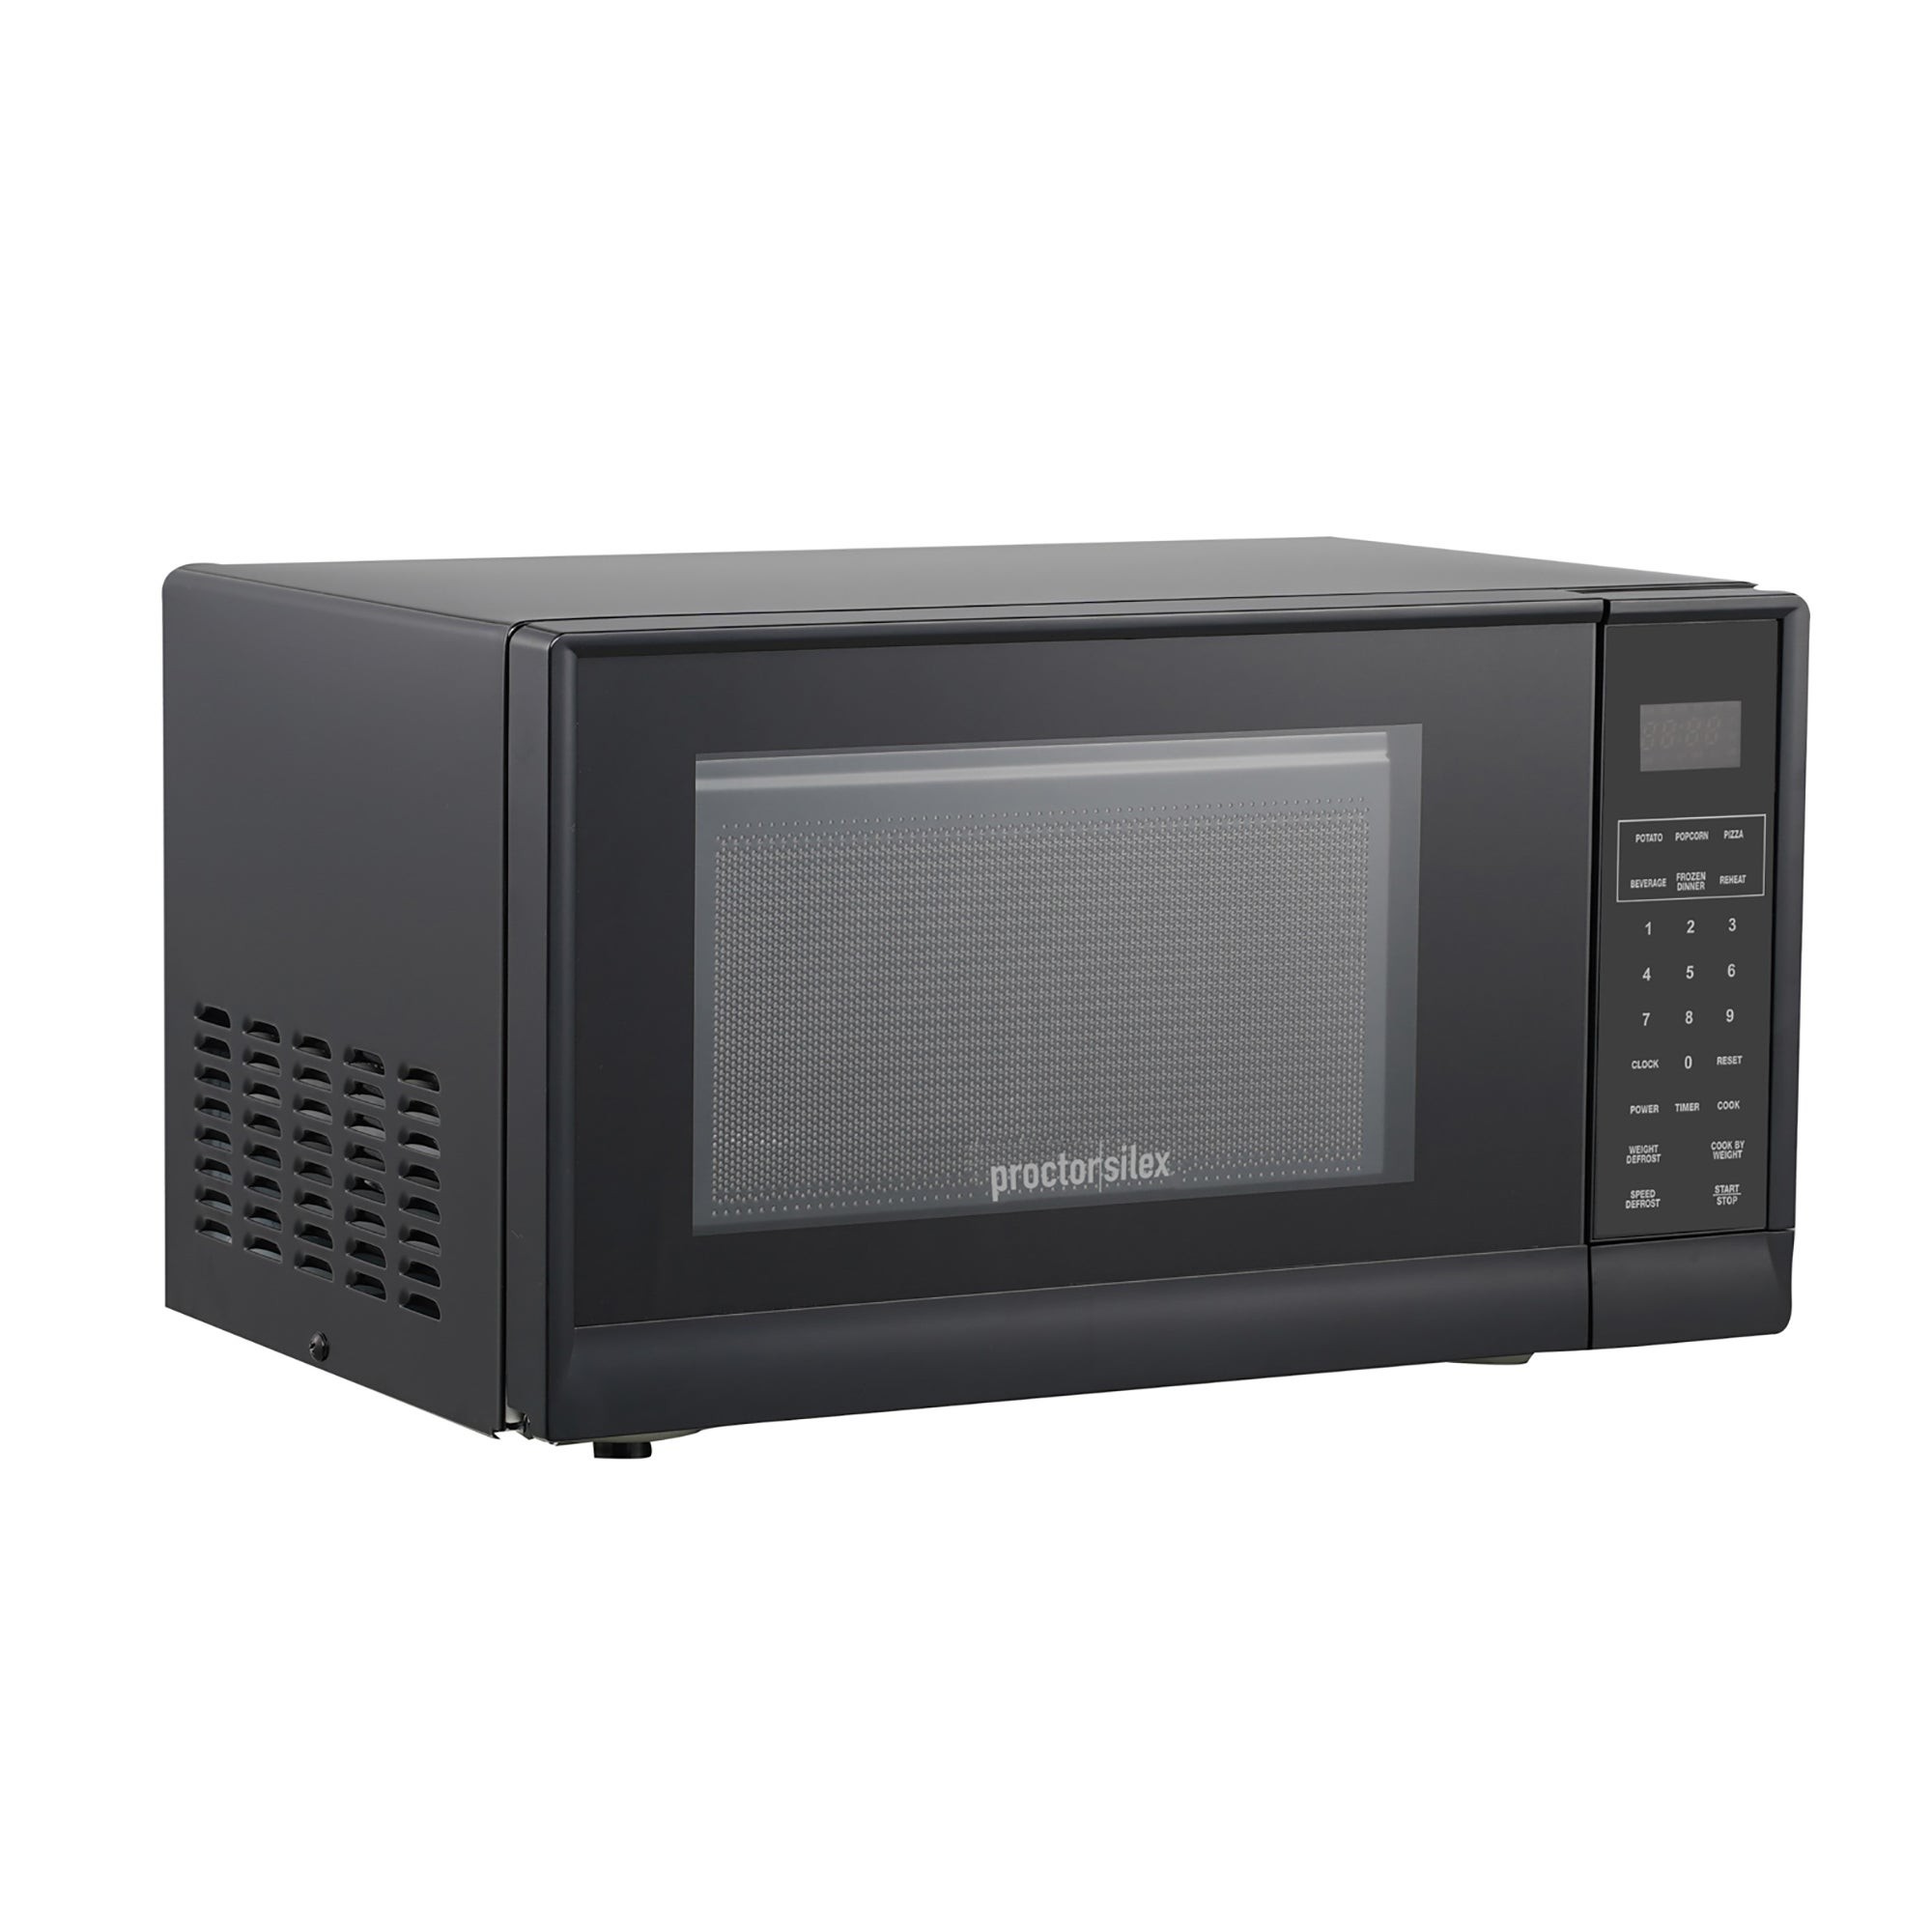 0.7 Cubic Foot 700W Microwave Oven Black